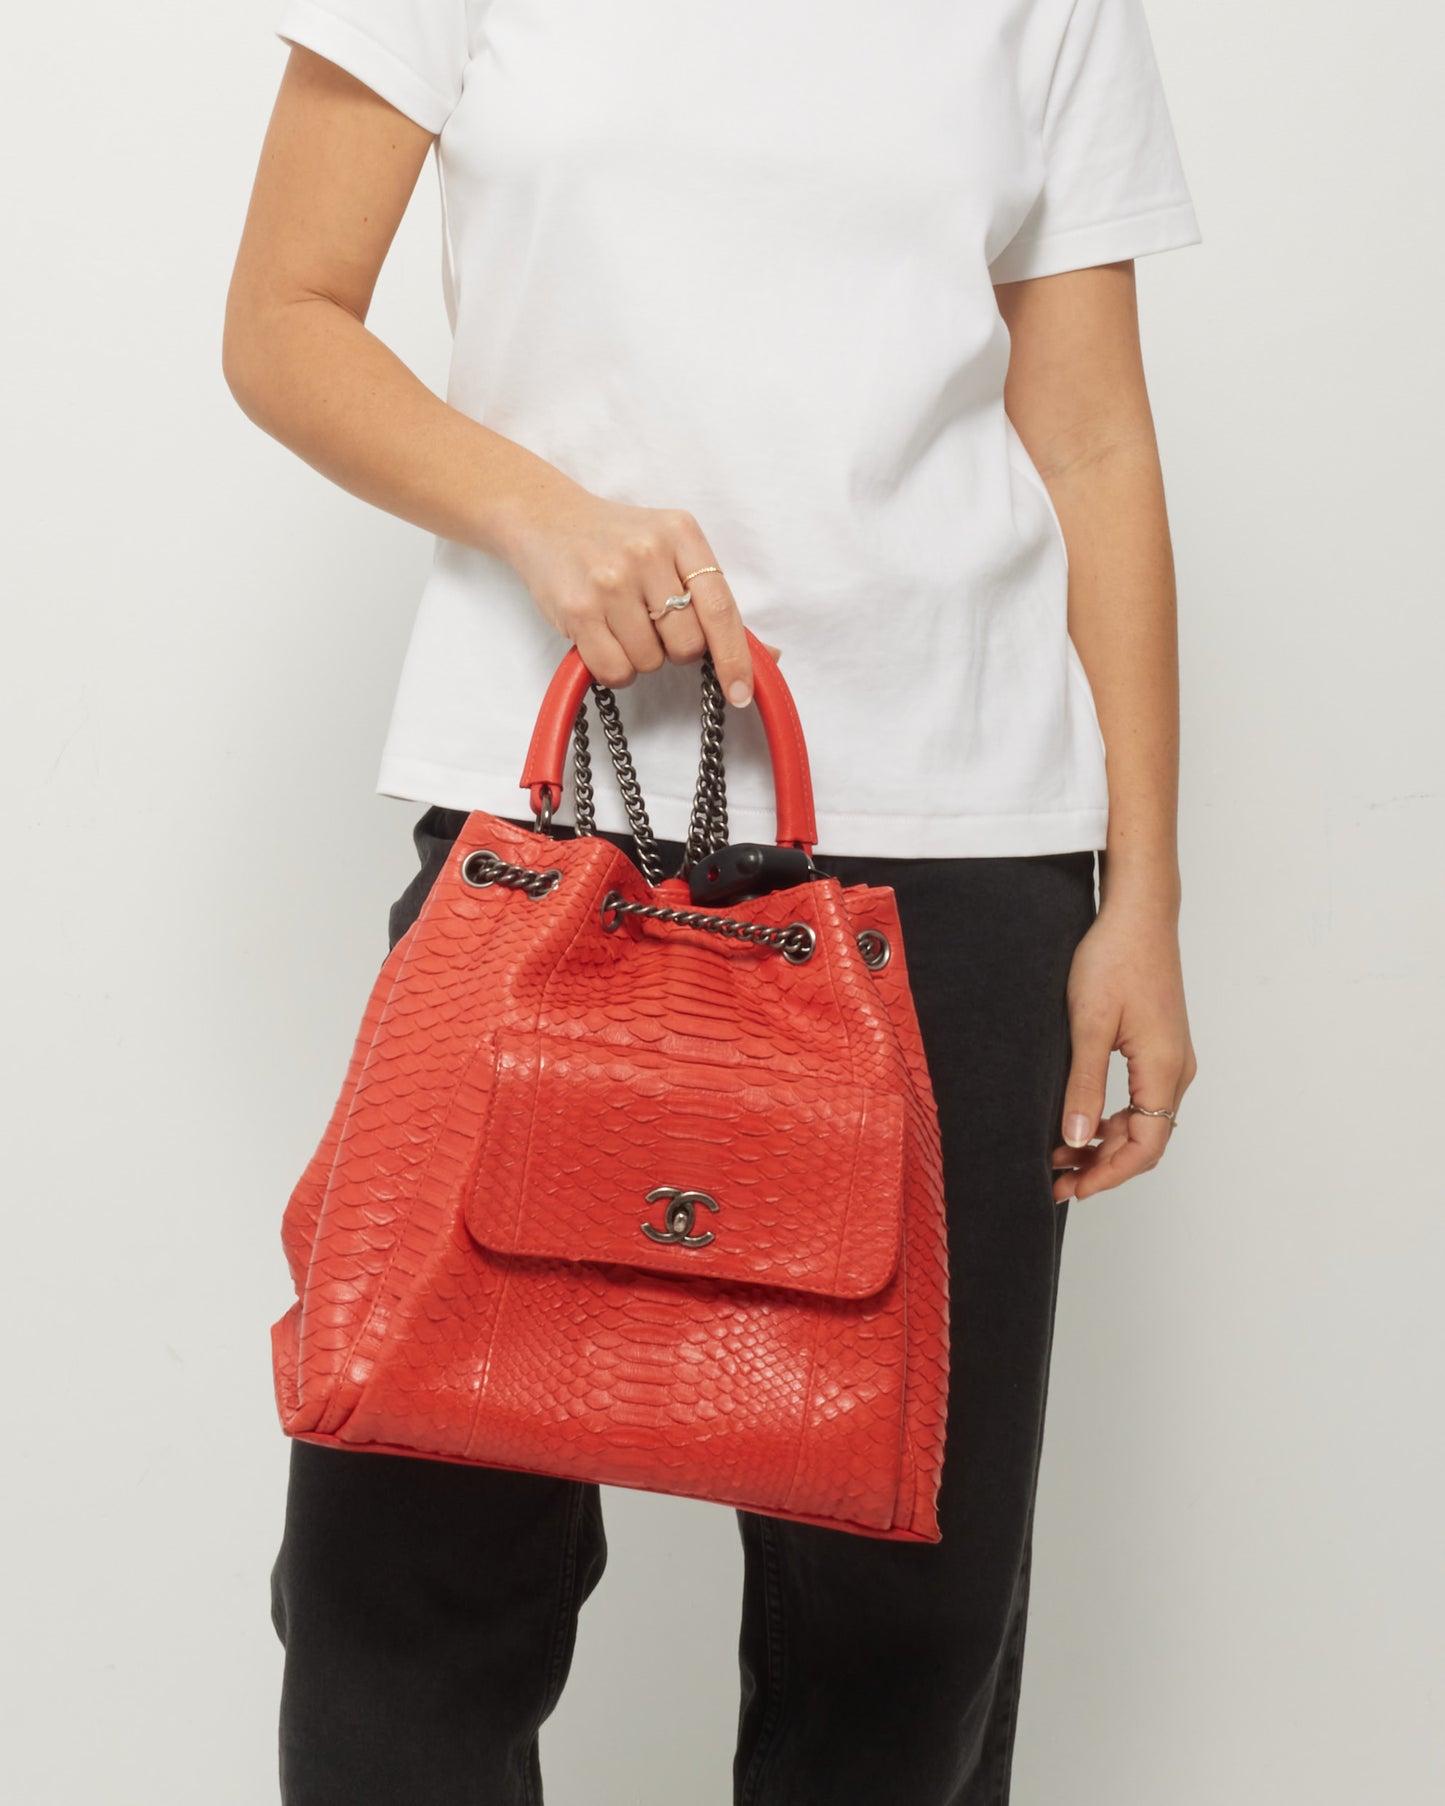 Chanel Red Python Top Handle Backpack